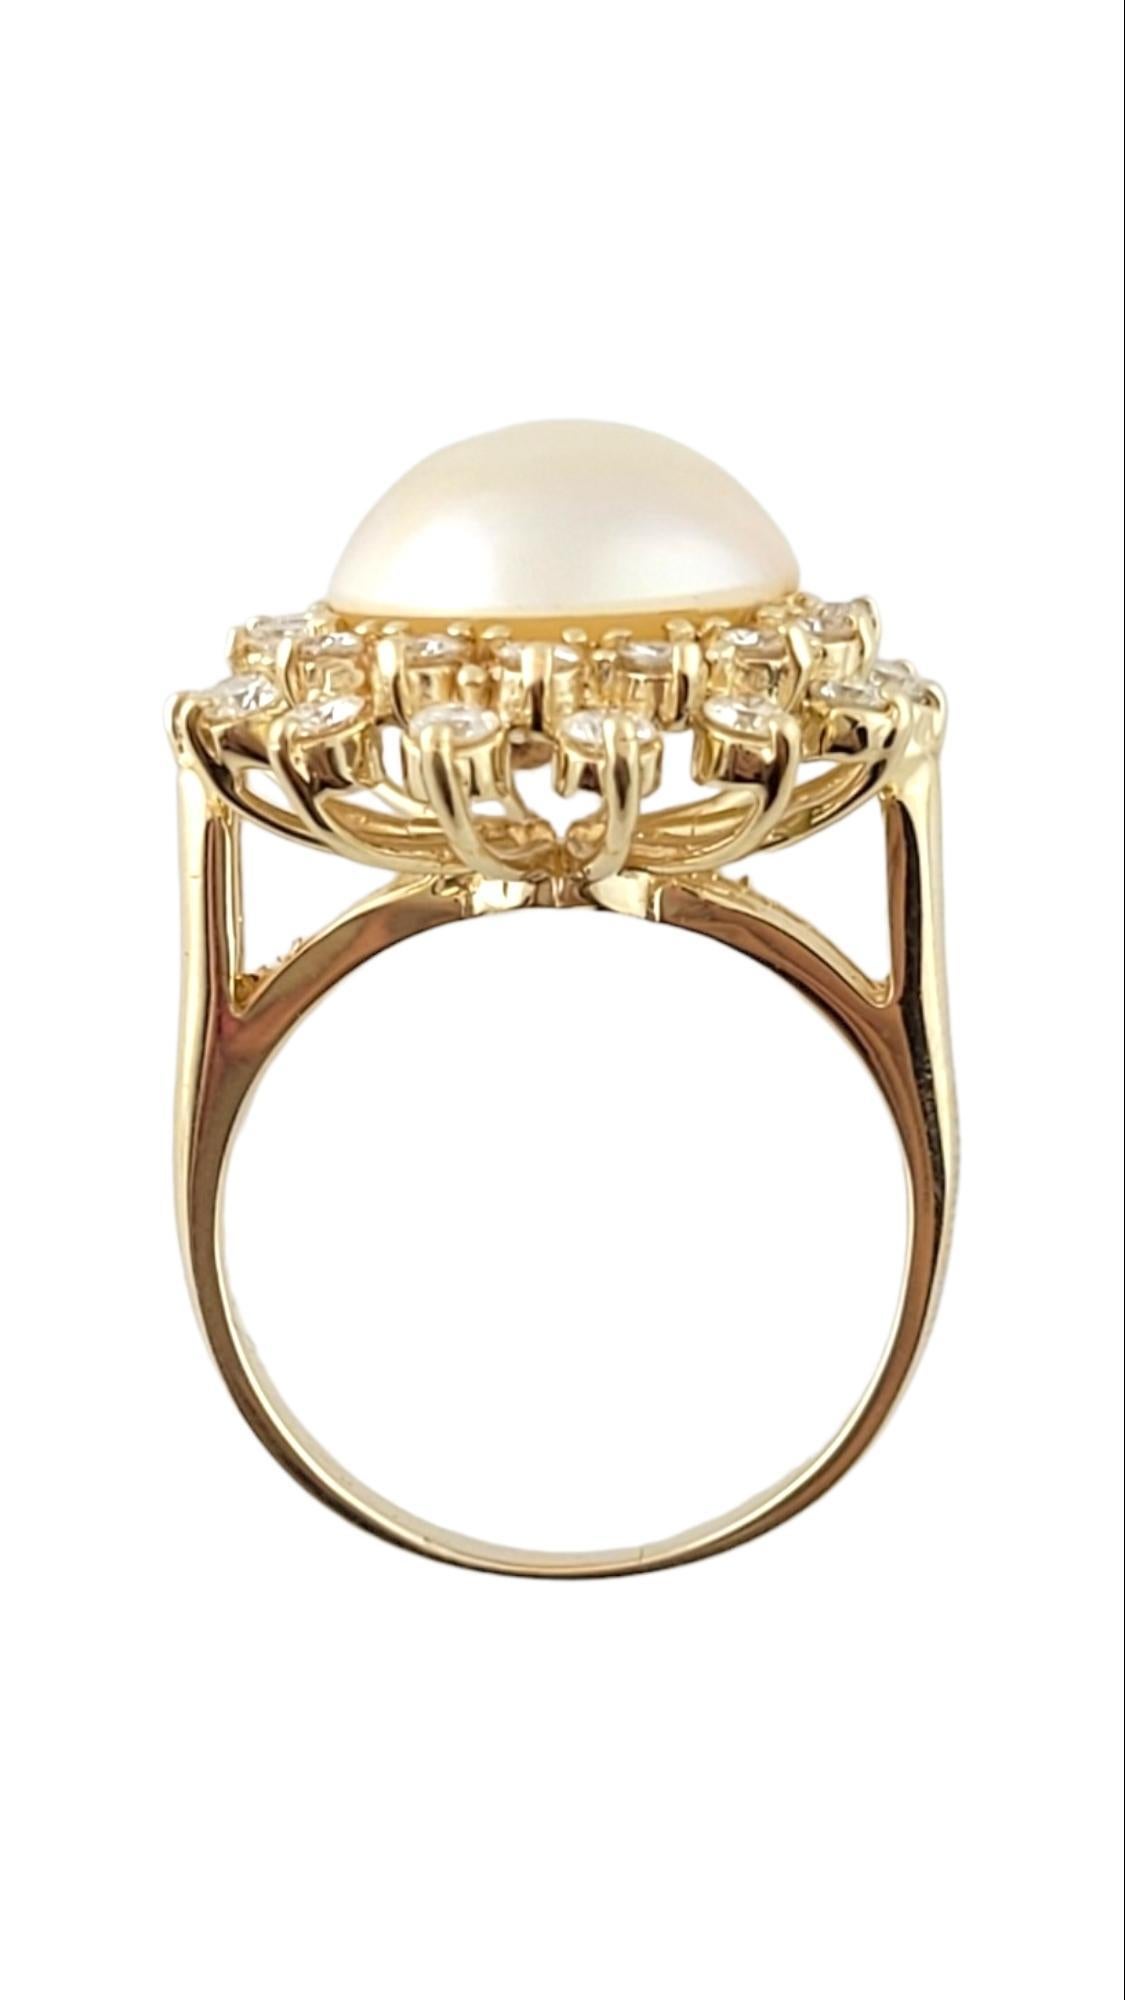 14K YellowGold Cultured Mabe Pearl/Diamond Ring Size 8.25 #15081 In Good Condition For Sale In Washington Depot, CT